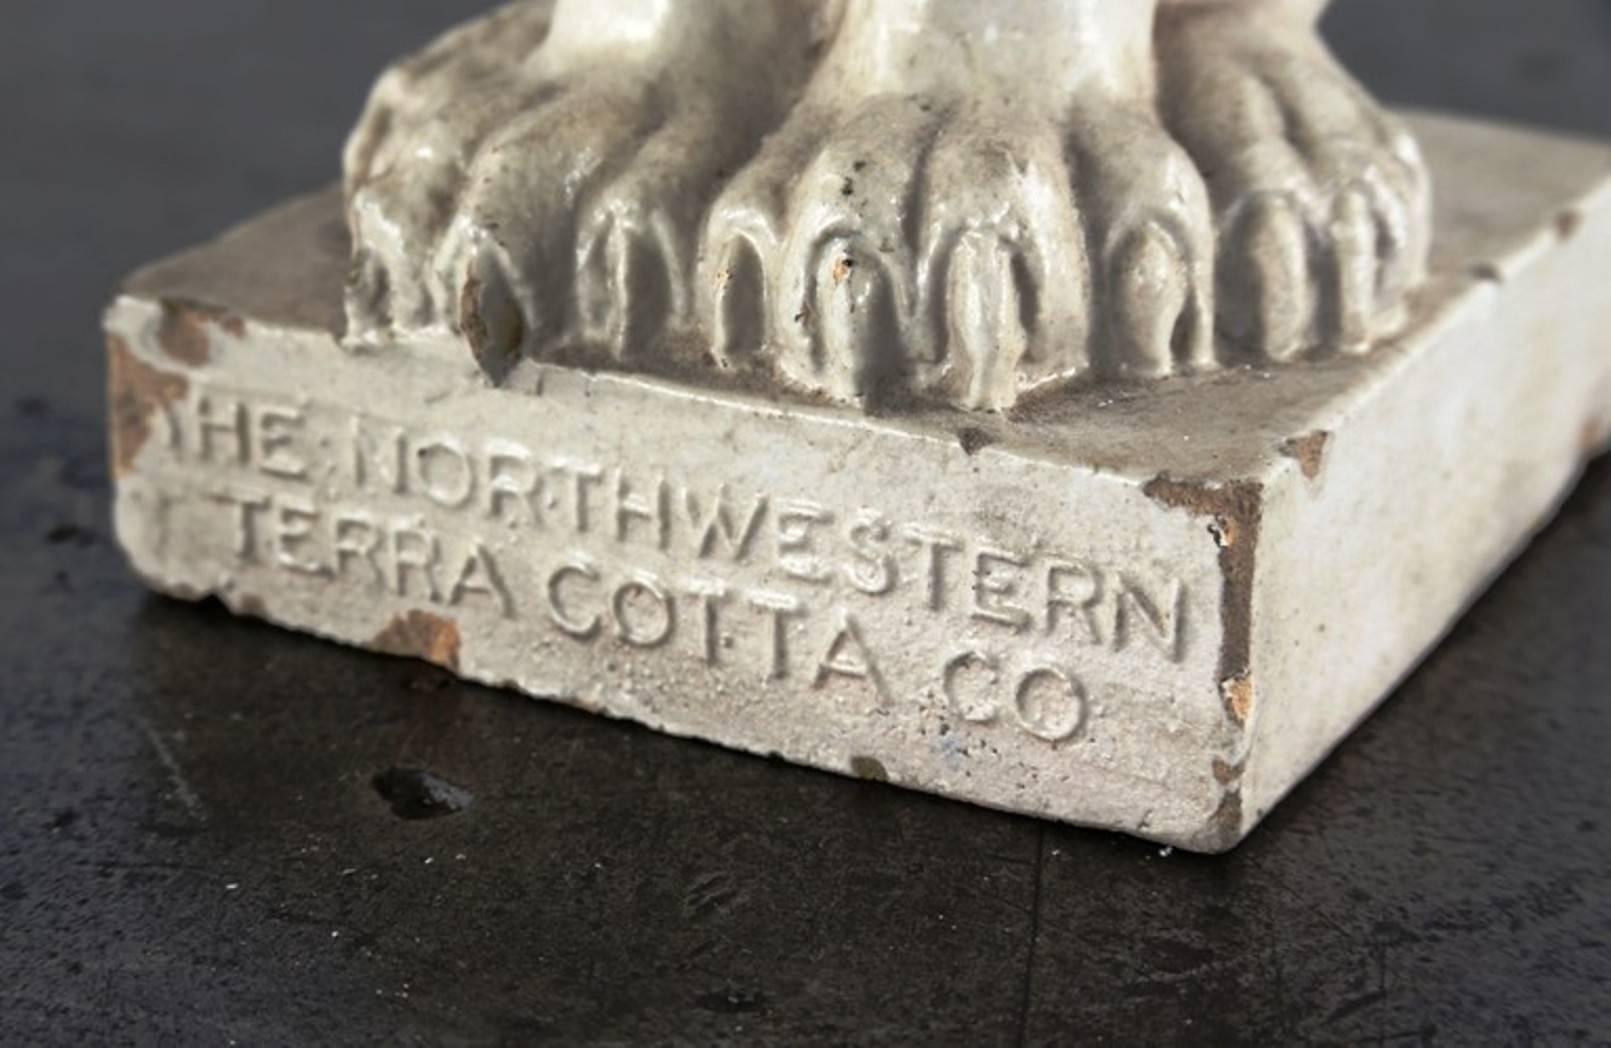 Seldom found original and intact early 20th century white glazed figural terra cotta freestanding rearing lion diminutive statue fabricated as an advertising piece by the northwestern terra cotta co., Chicago, ill. The figural statue's design is